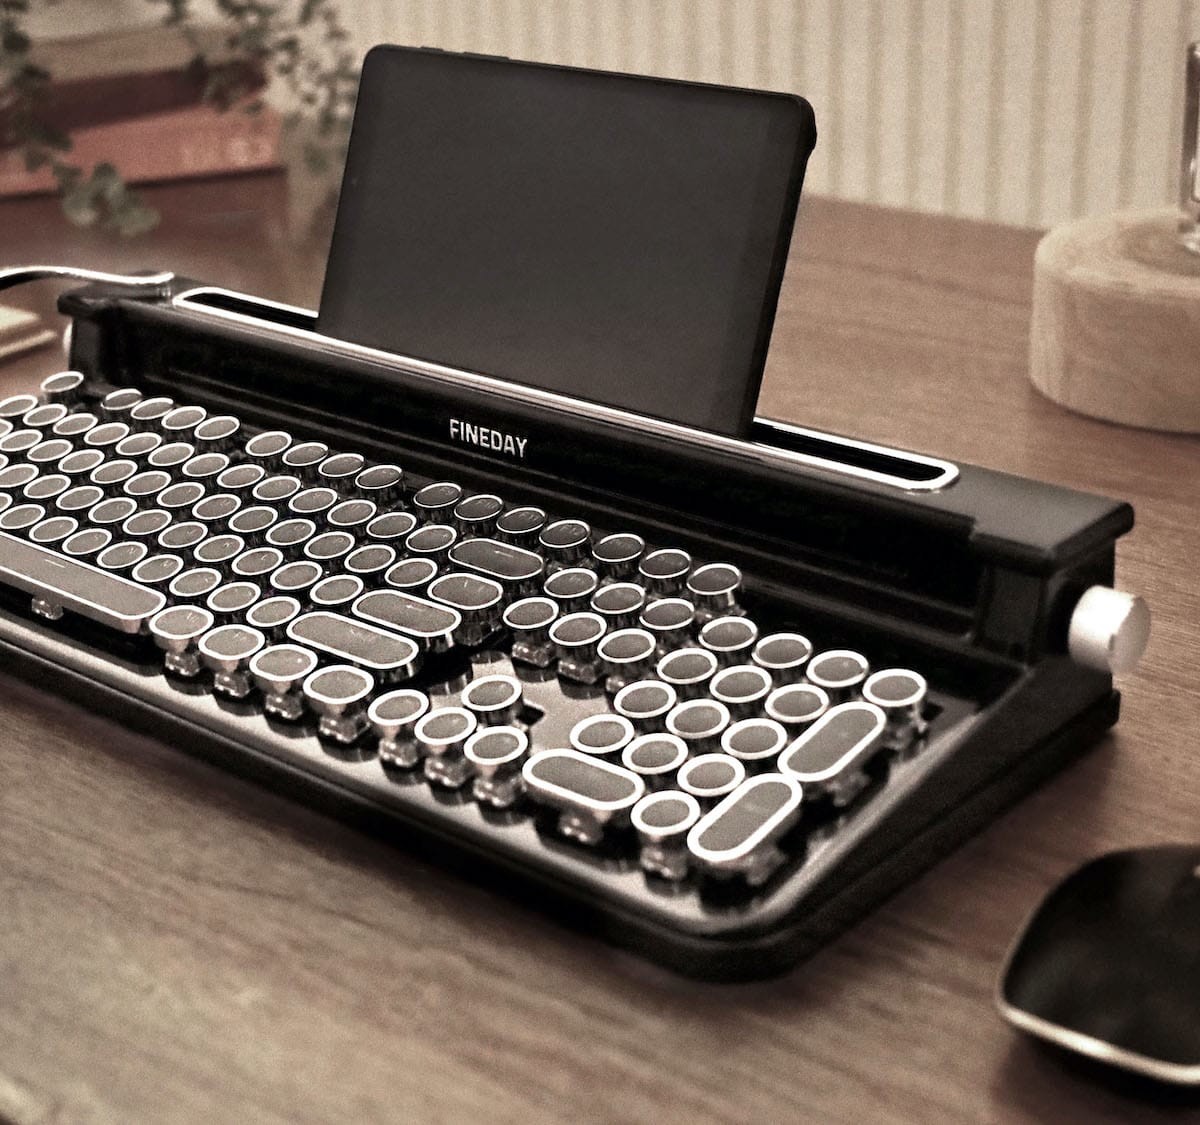 Computer keyboard looks like old typewriter - hisaproductions